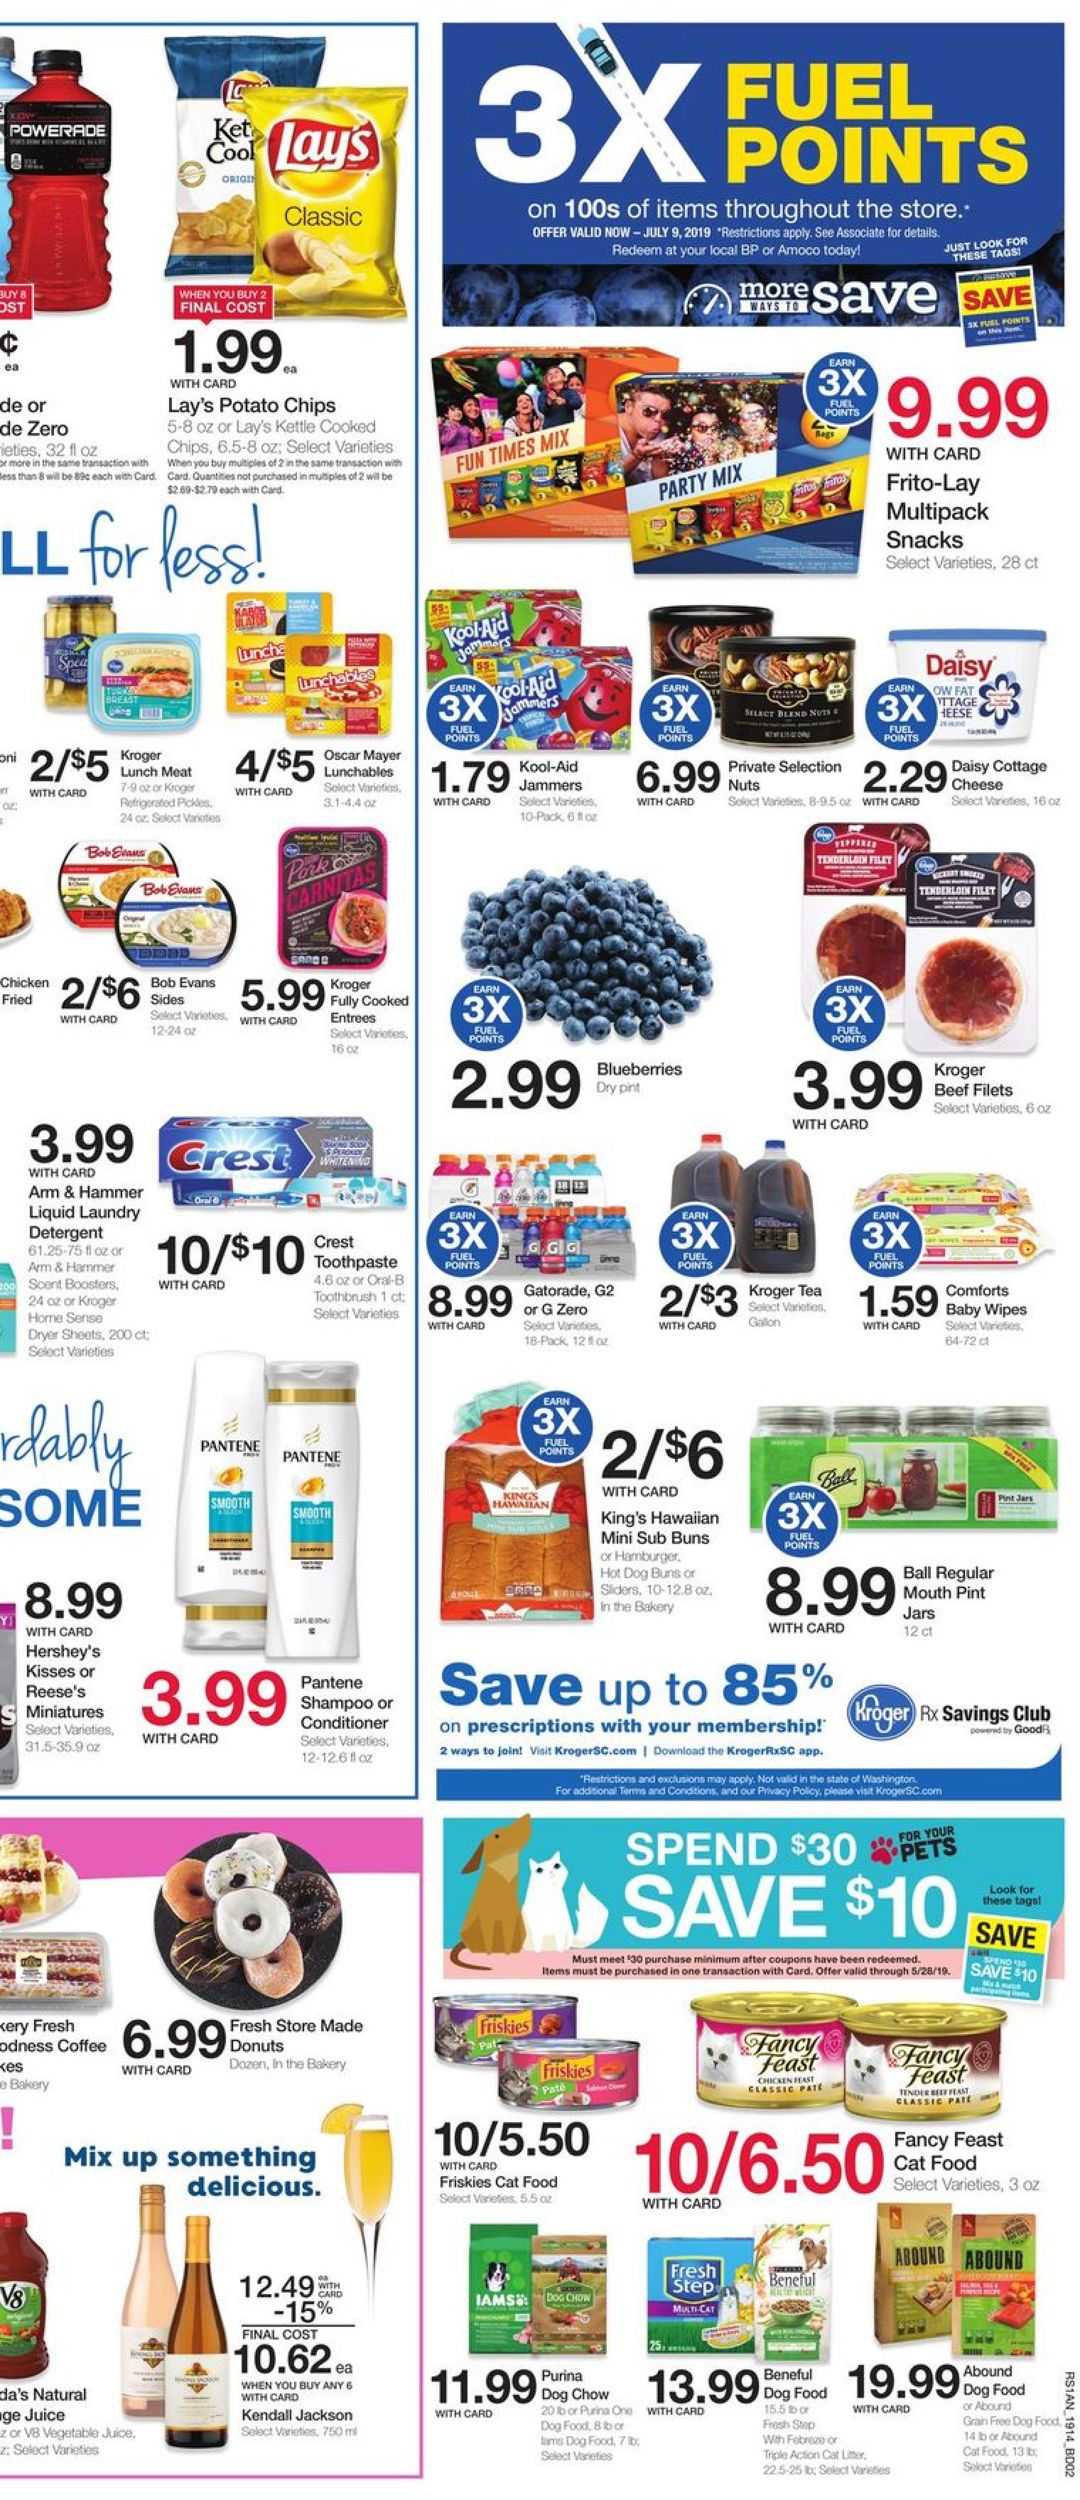 Pick ‘n Save Current weekly ad 05/08 - 05/14/2019 [3] - frequent-ads.com